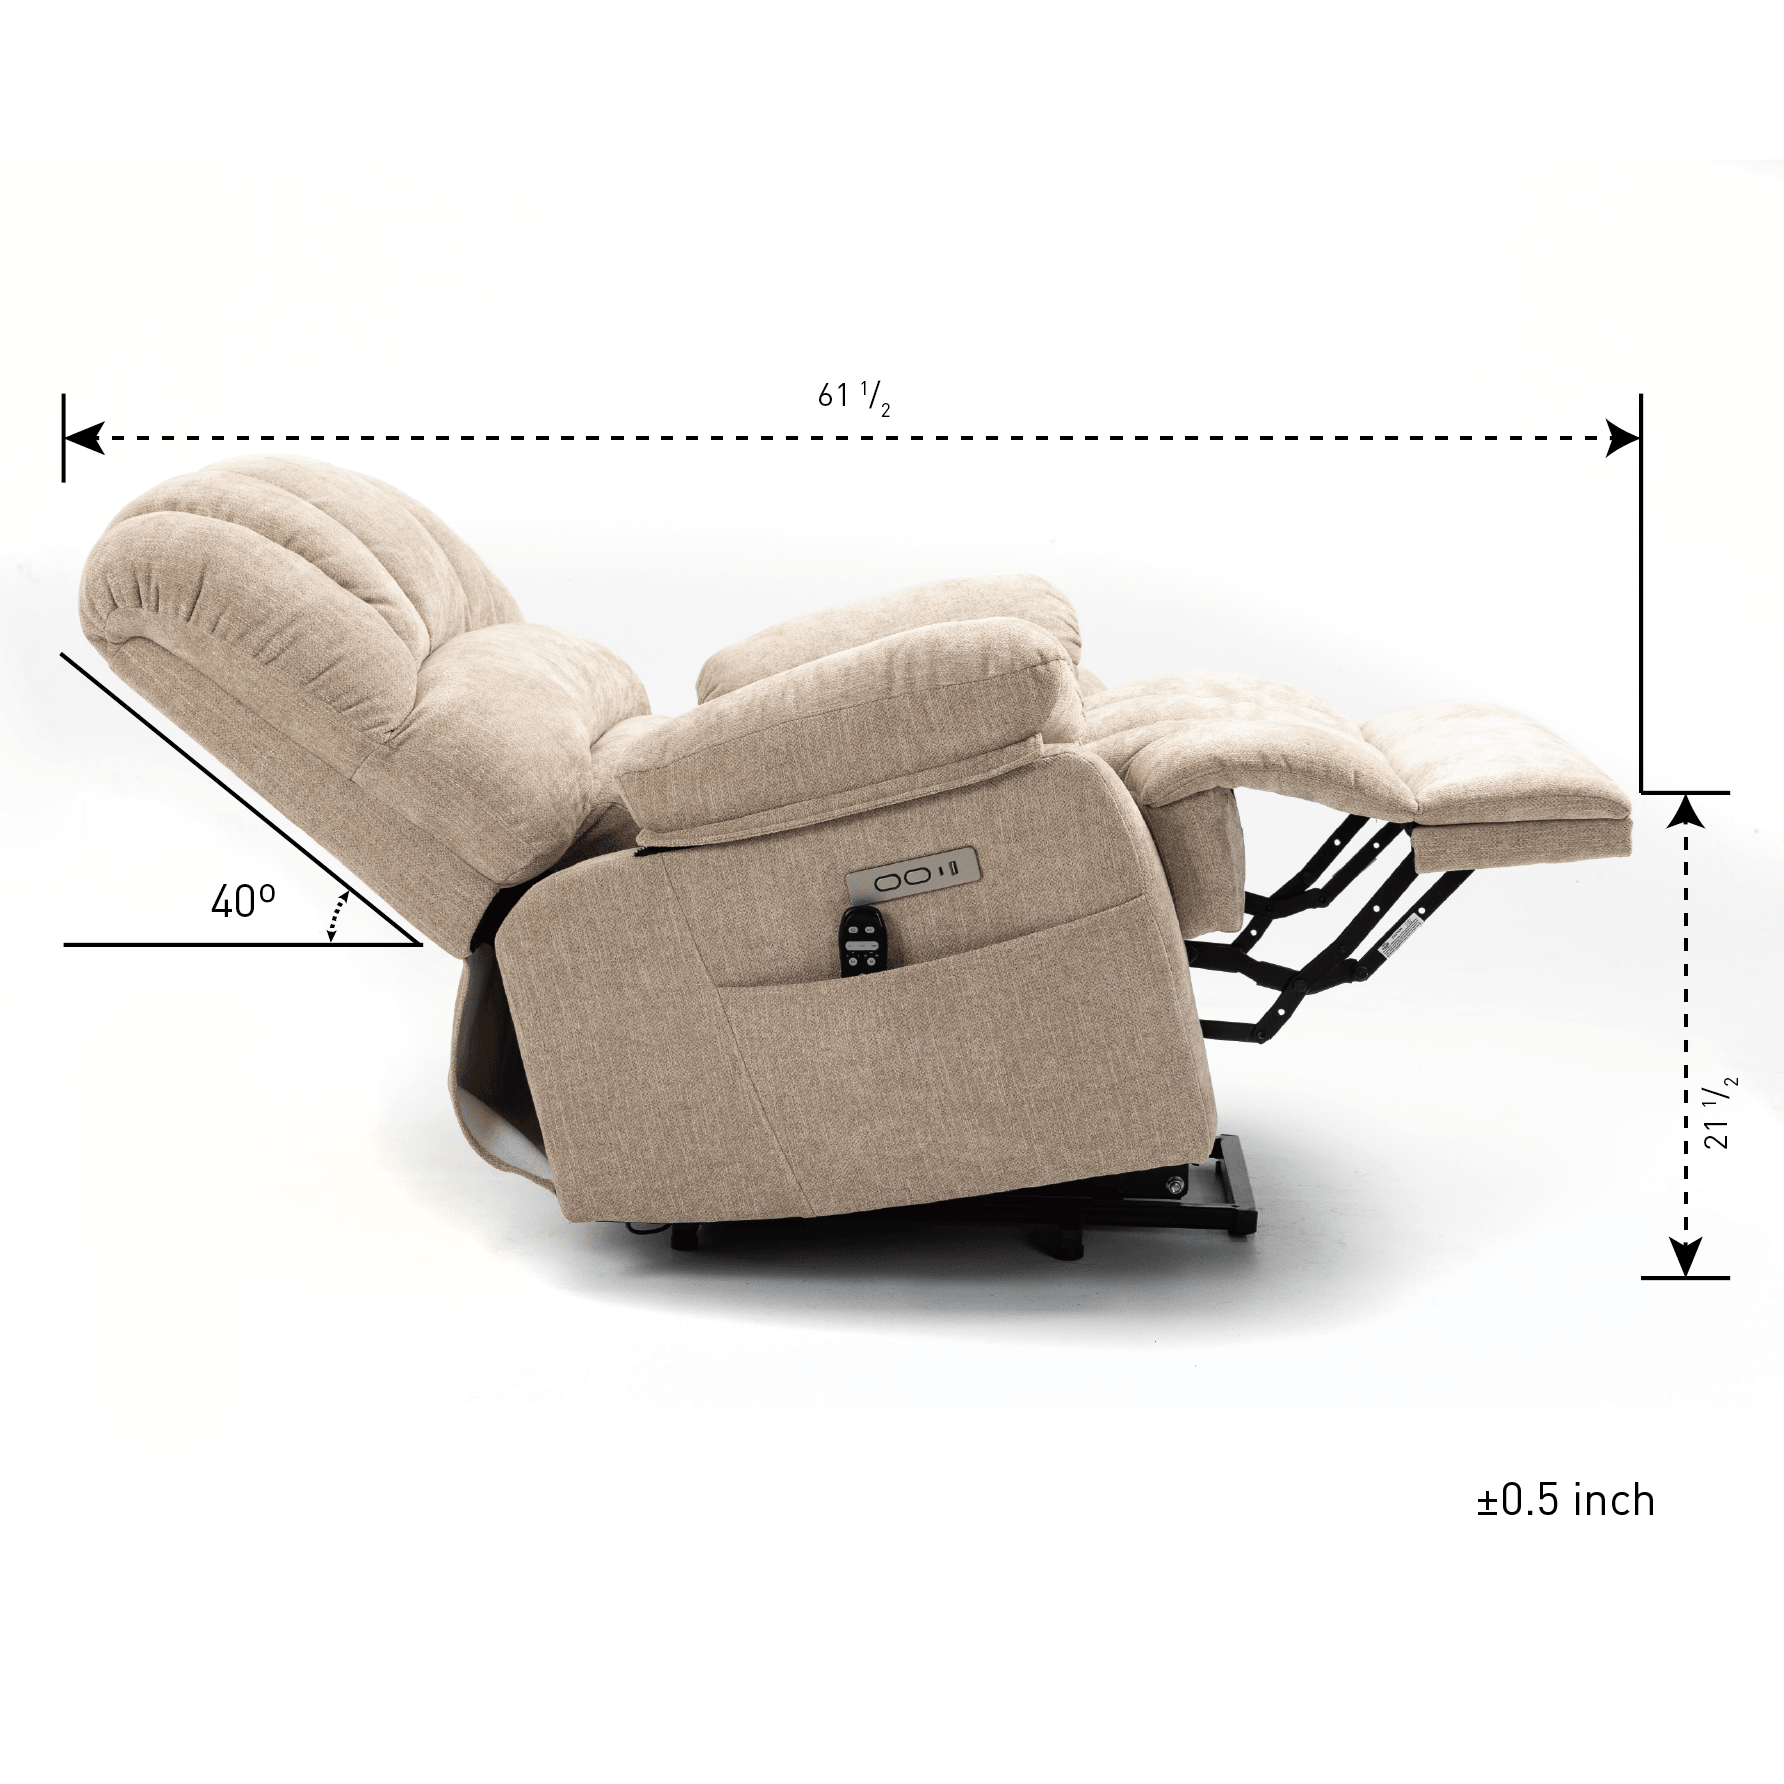 Large Power Lift Recliner Chair with Heat and Massage, reclined measurements